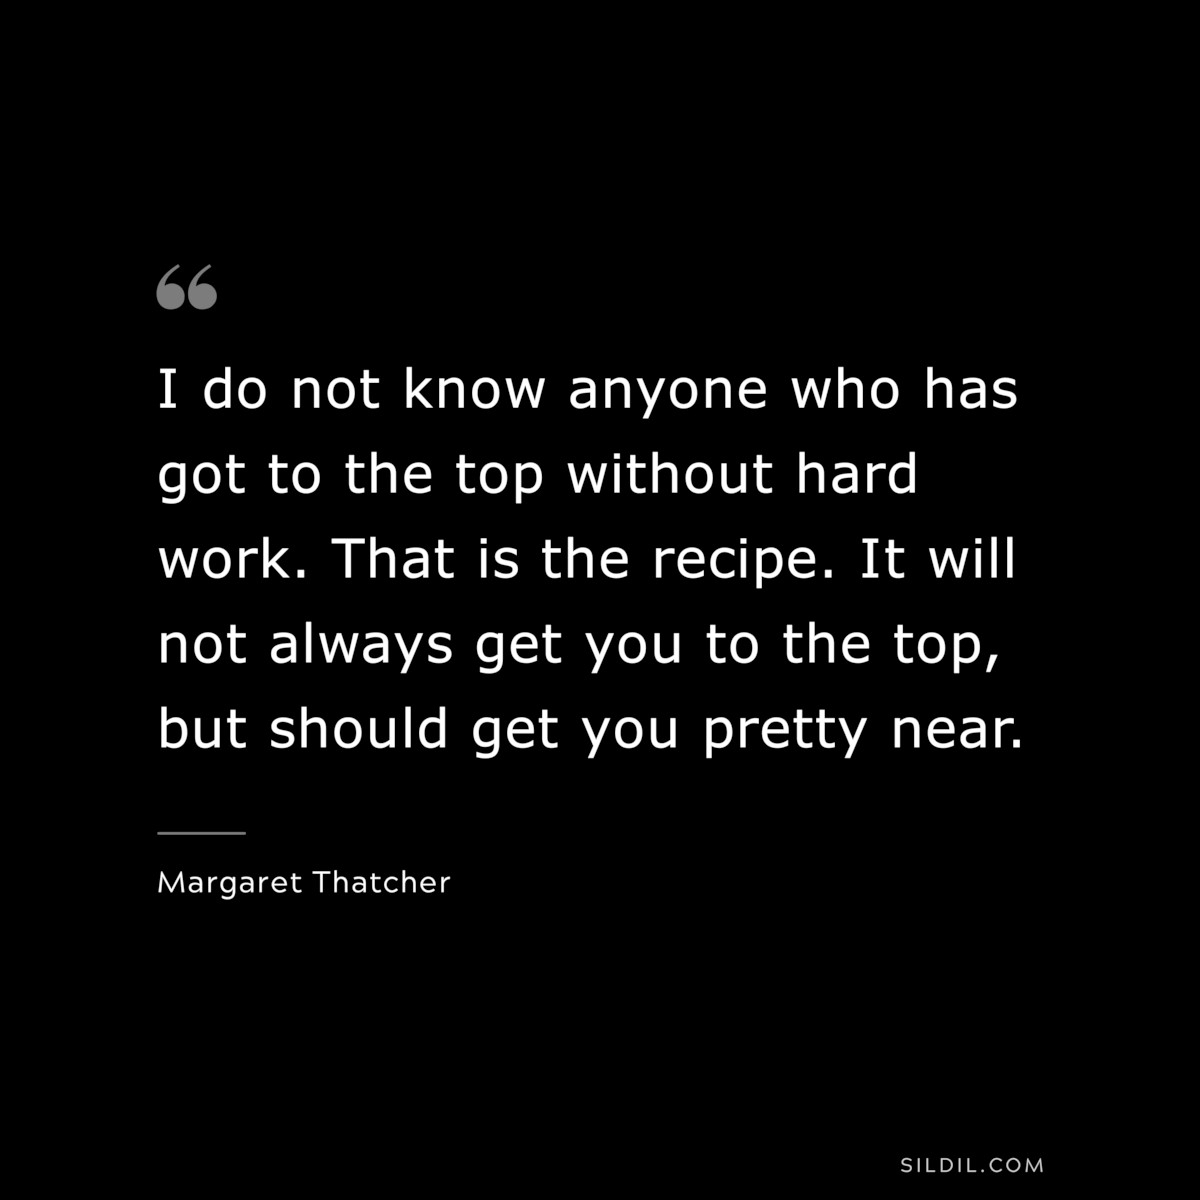 I do not know anyone who has got to the top without hard work. That is the recipe. It will not always get you to the top, but should get you pretty near. ― Margaret Thatcher